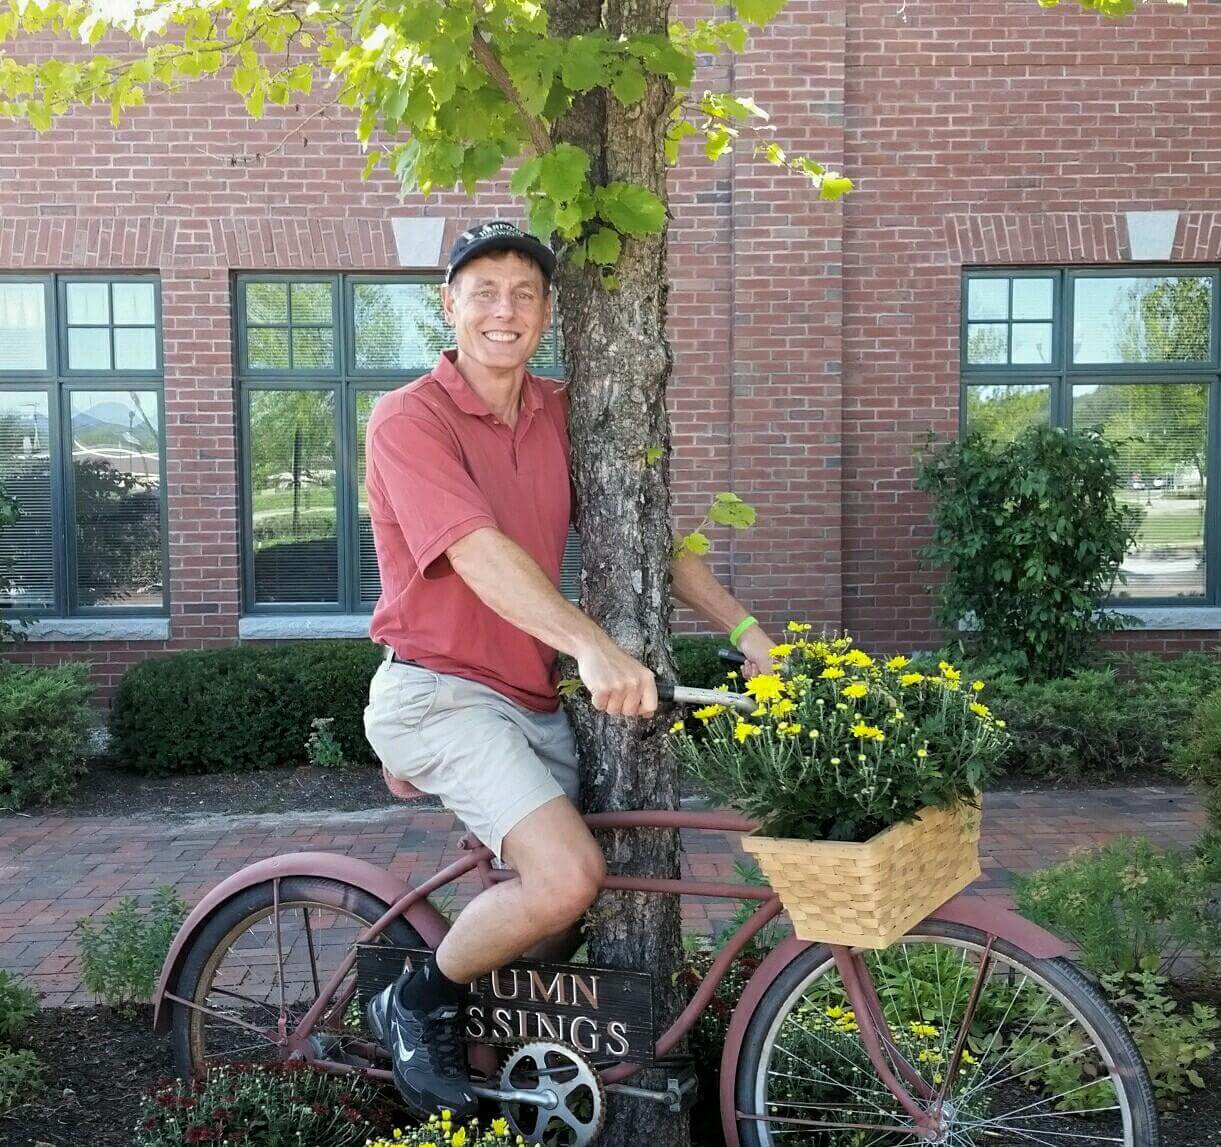 Barry posing on the vintage bicycle decorating the Bethel branch